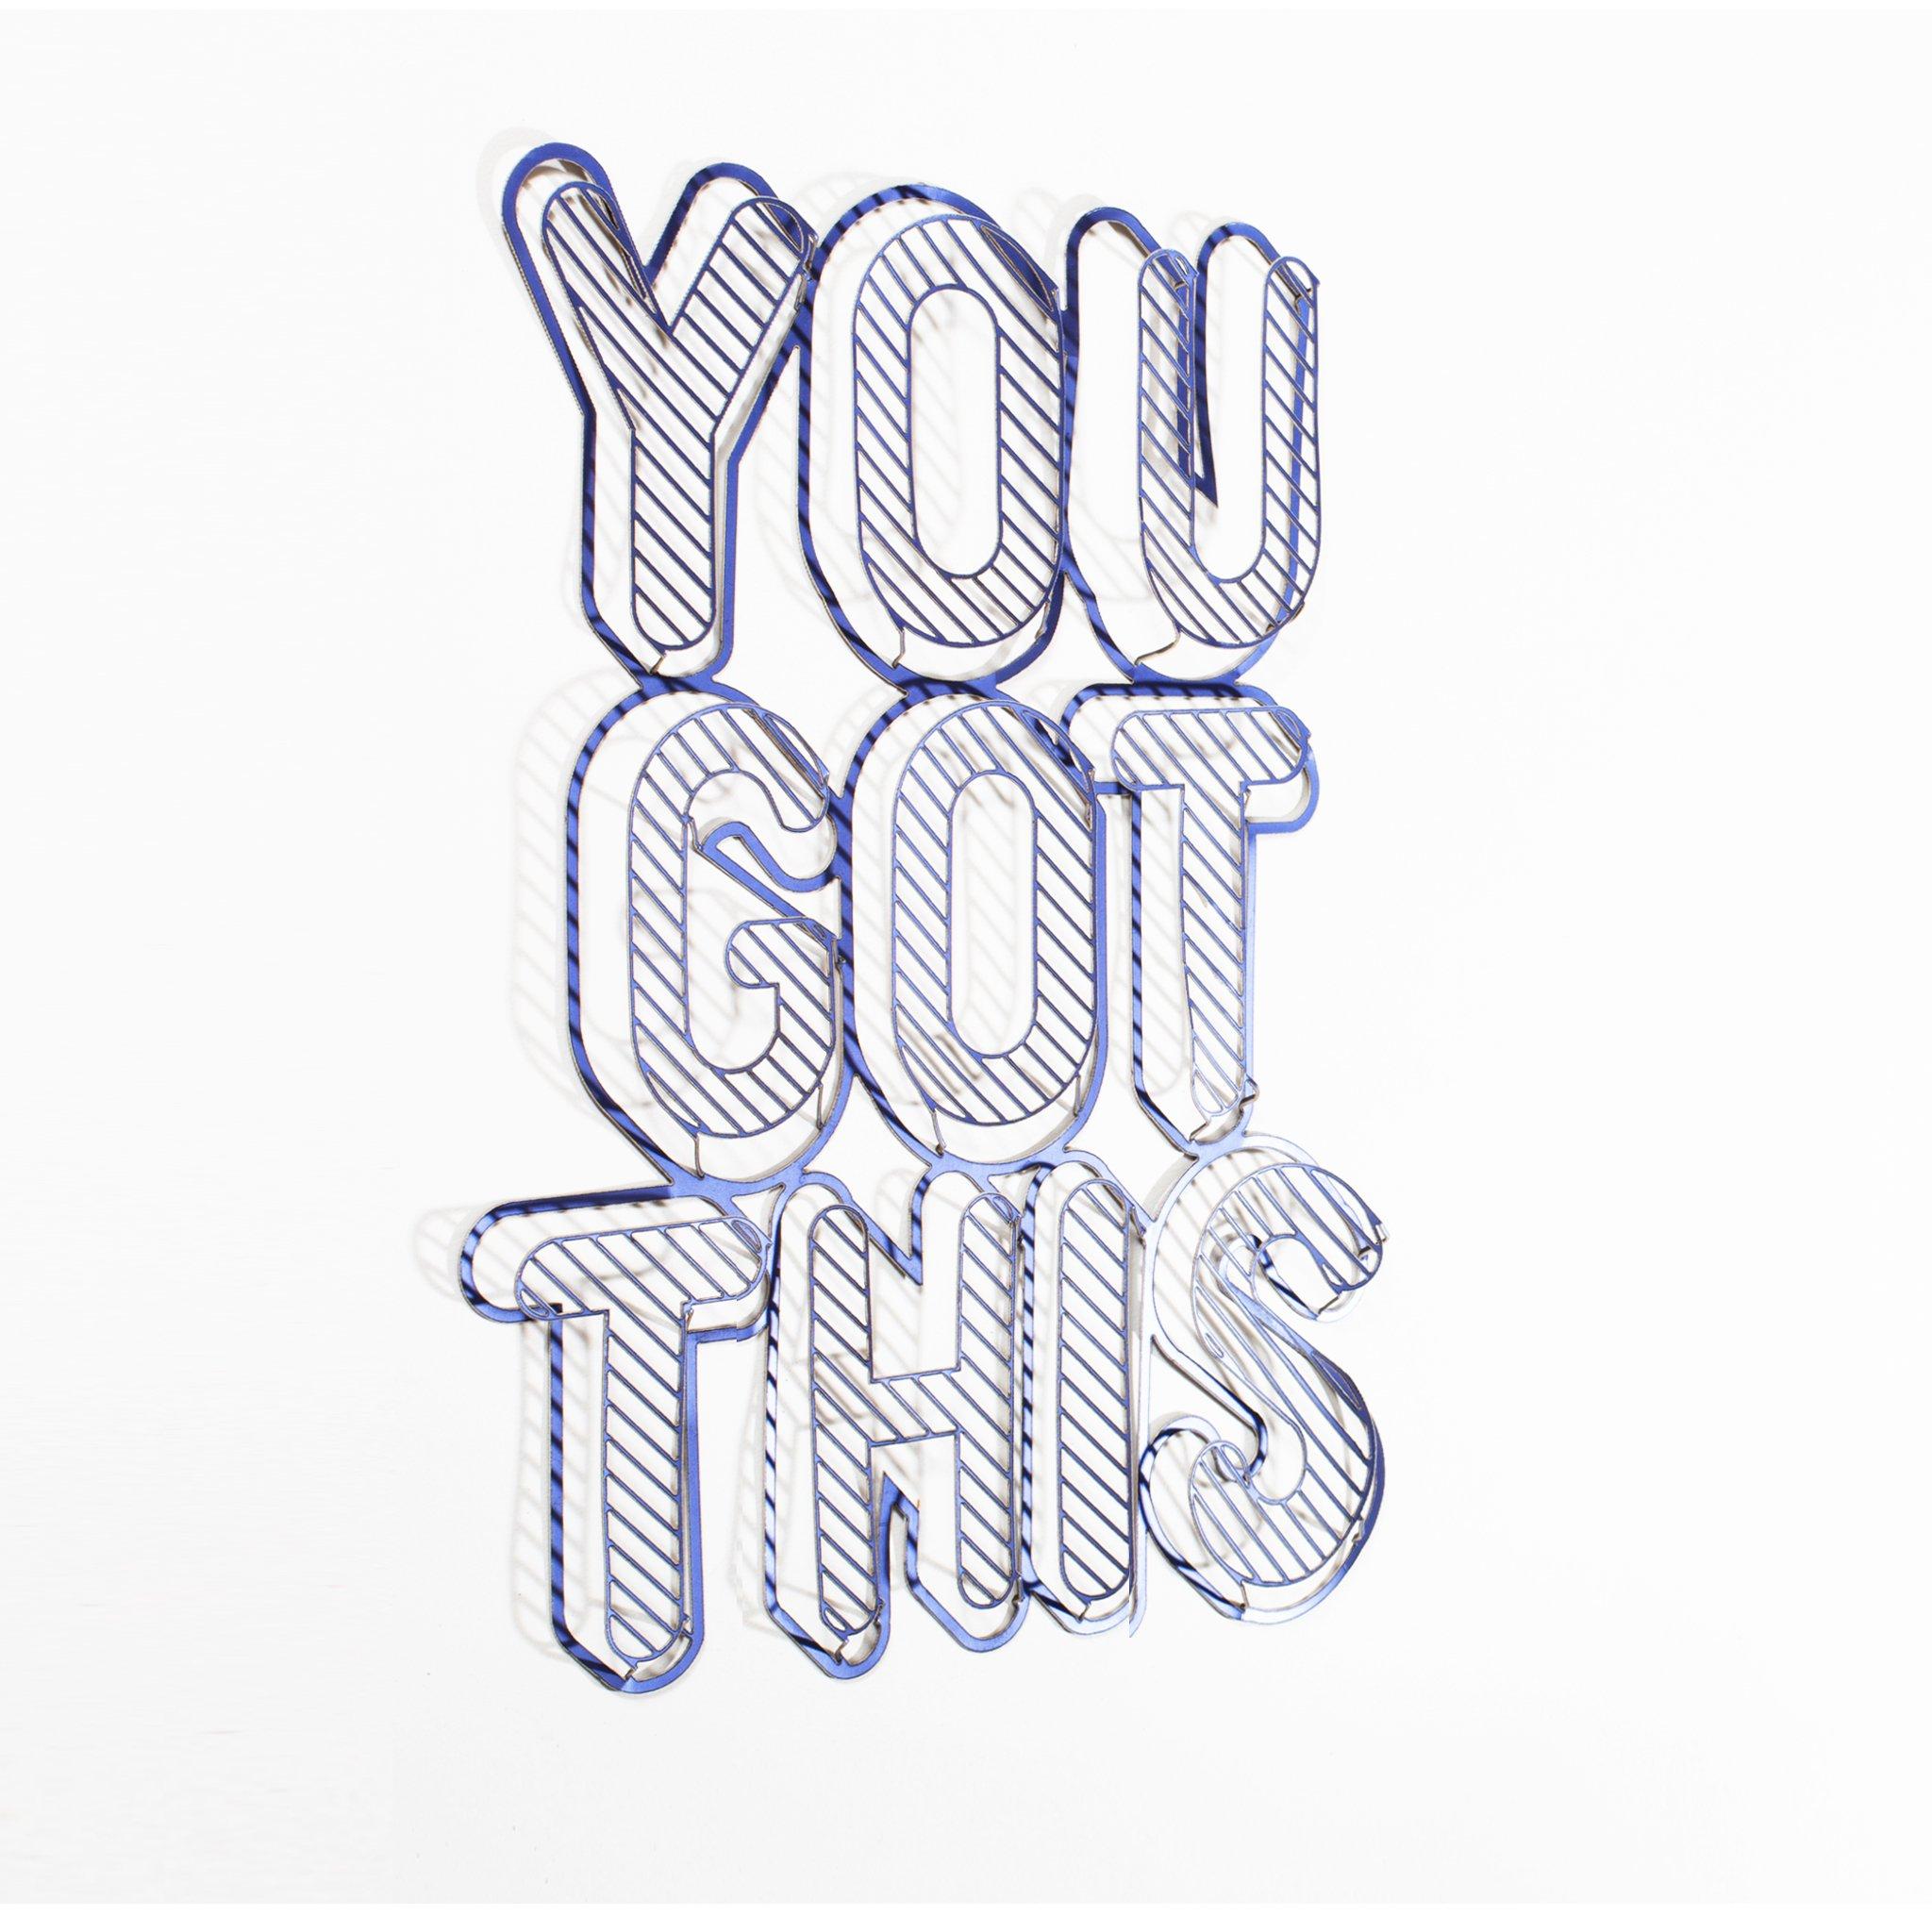 YOU GOT THIS Inspirational Phrase to hang on the wall | Wall Decor